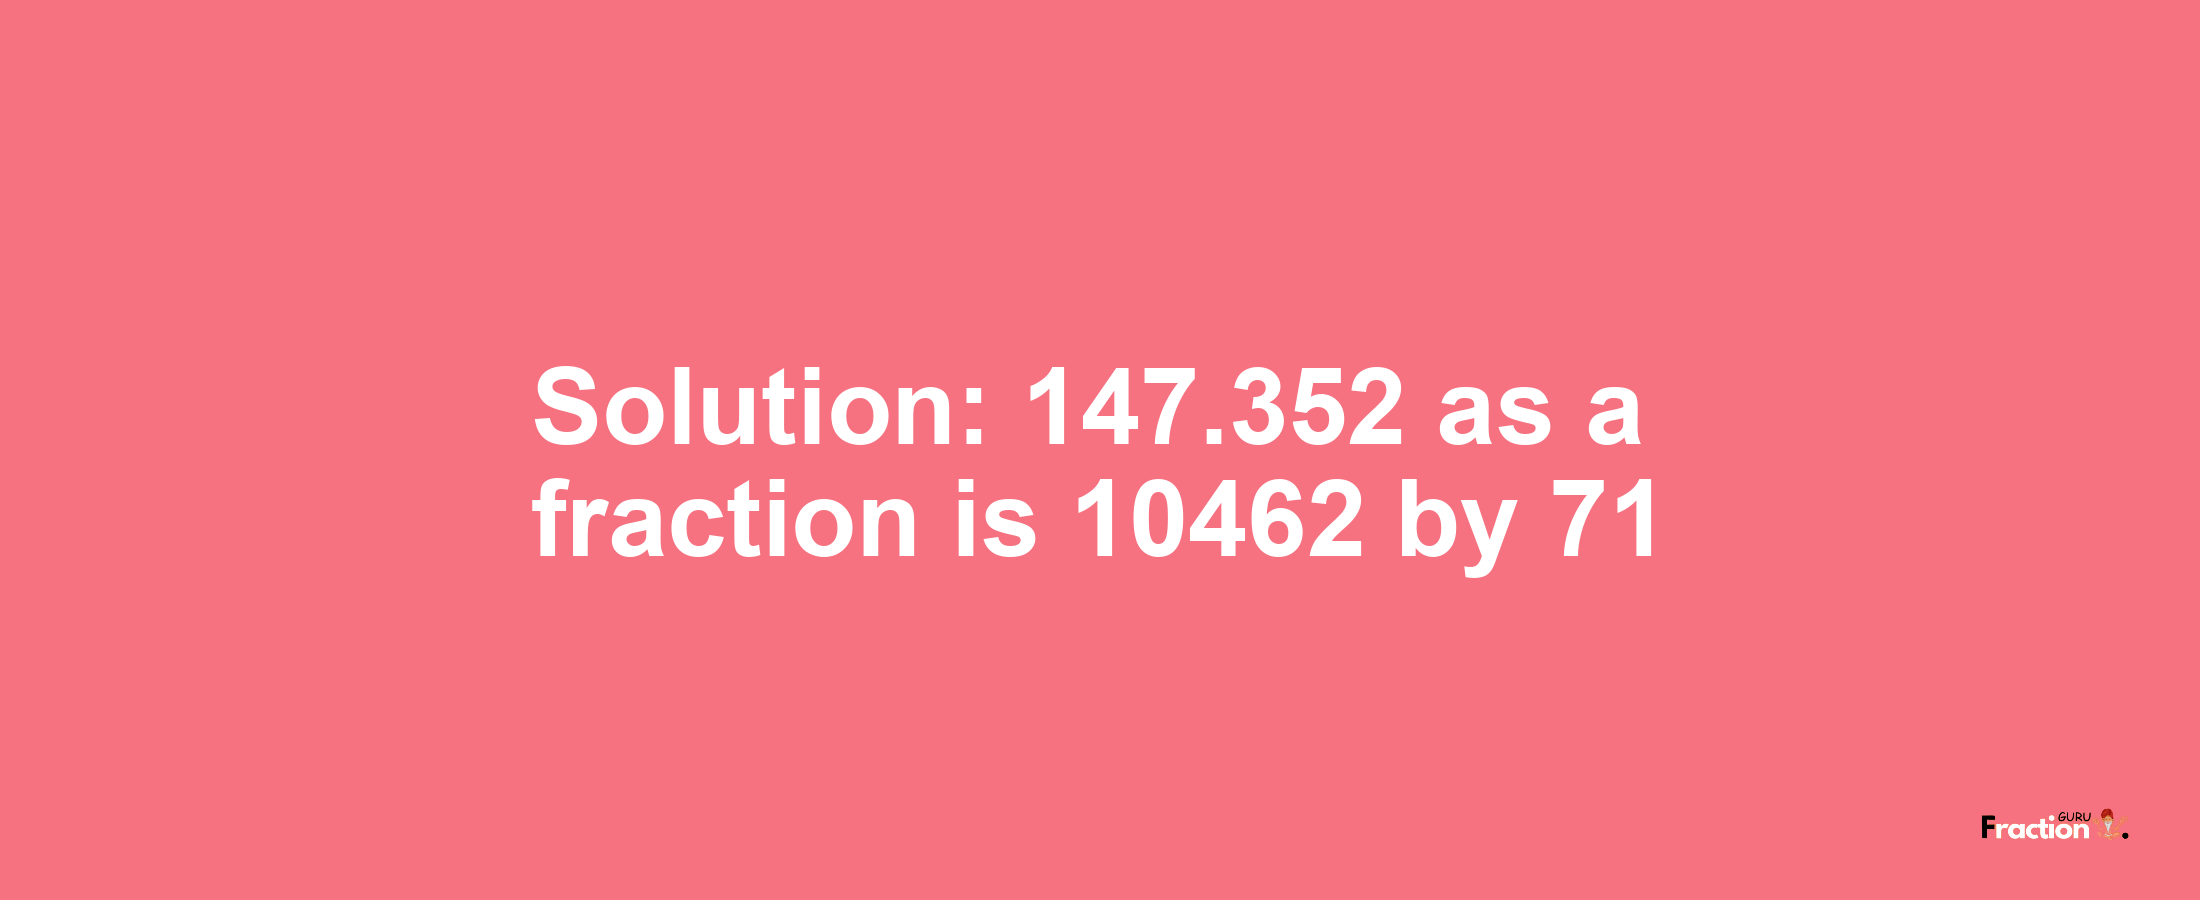 Solution:147.352 as a fraction is 10462/71